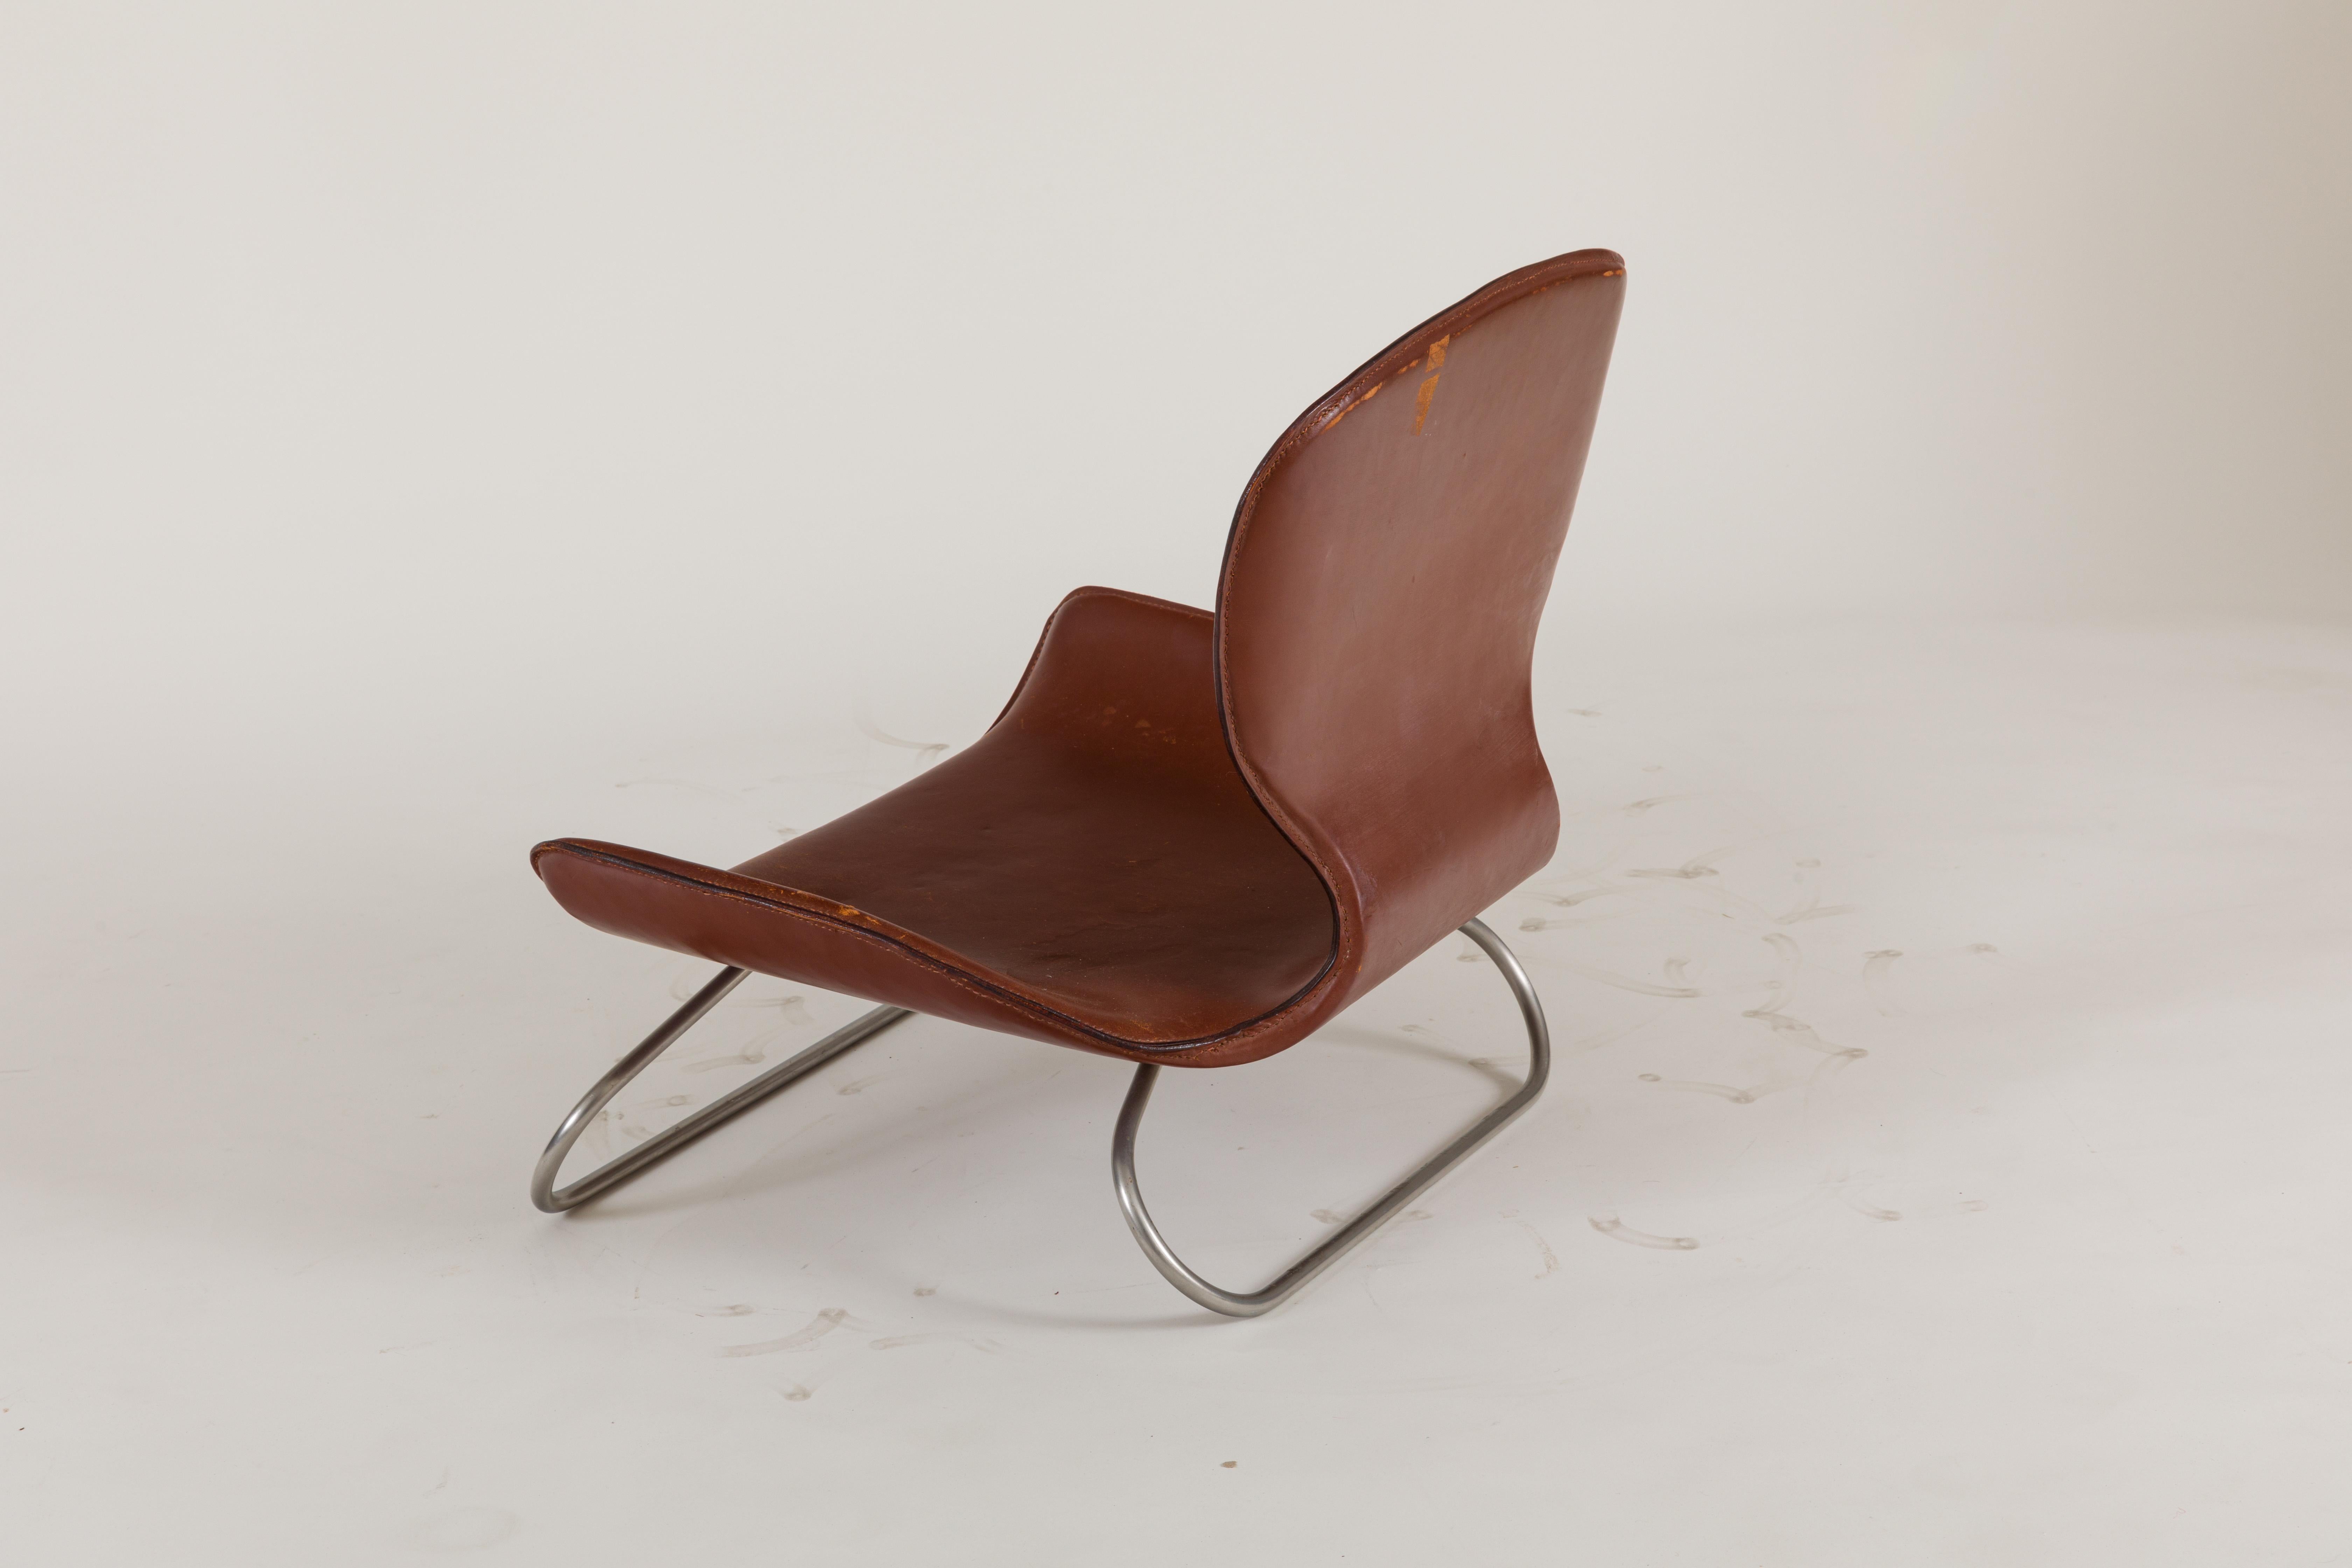 K-3 Low Leather Chair by Kirsten Jones & Adam Bottomley for KOI, England, 2000s In Good Condition For Sale In New York, NY